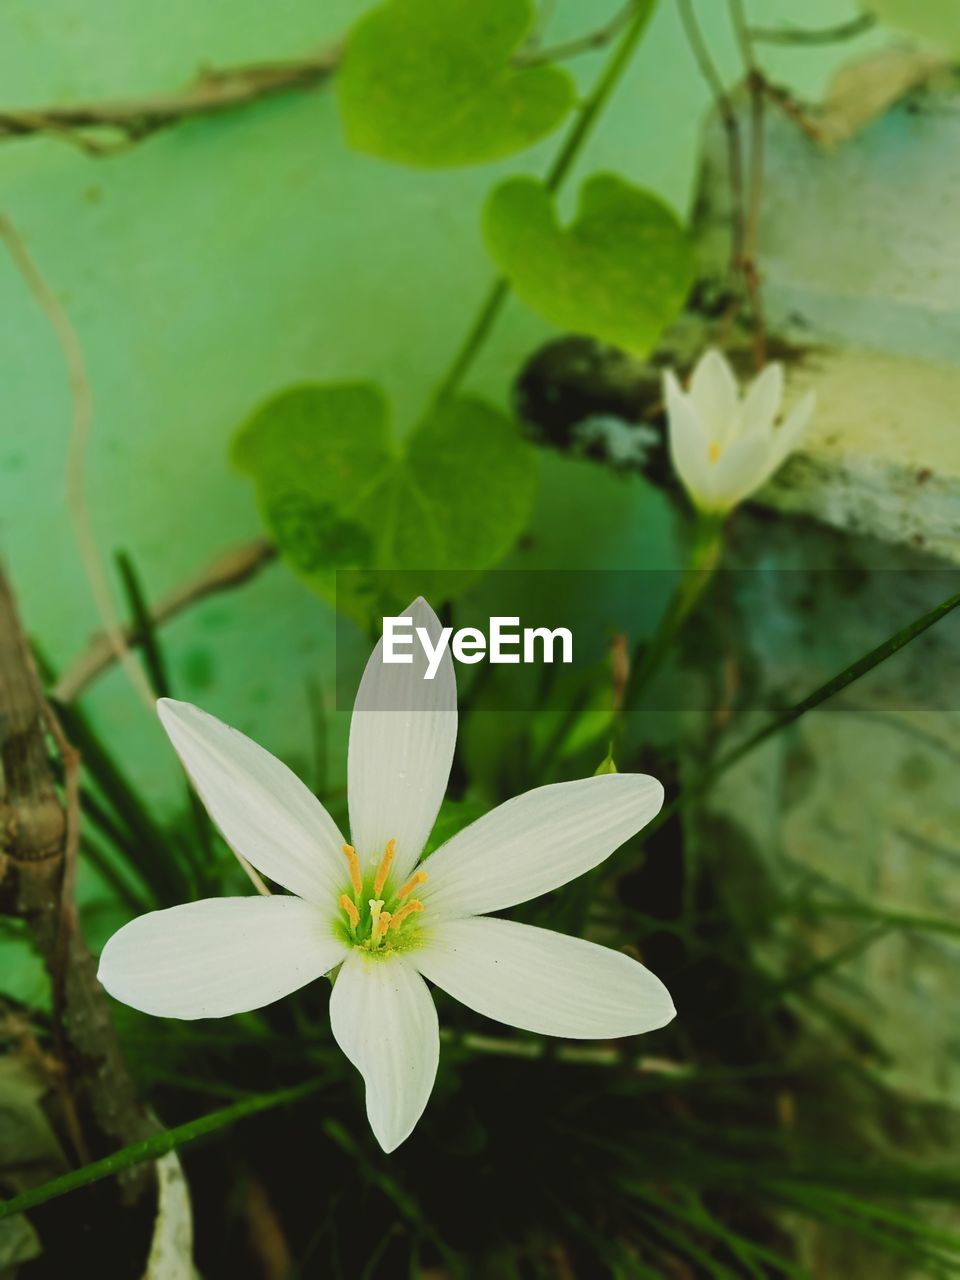 plant, flower, flowering plant, green, freshness, beauty in nature, leaf, close-up, nature, plant part, growth, fragility, flower head, petal, inflorescence, wildflower, white, no people, water, blossom, focus on foreground, water lily, outdoors, day, lake, springtime, botany, pollen